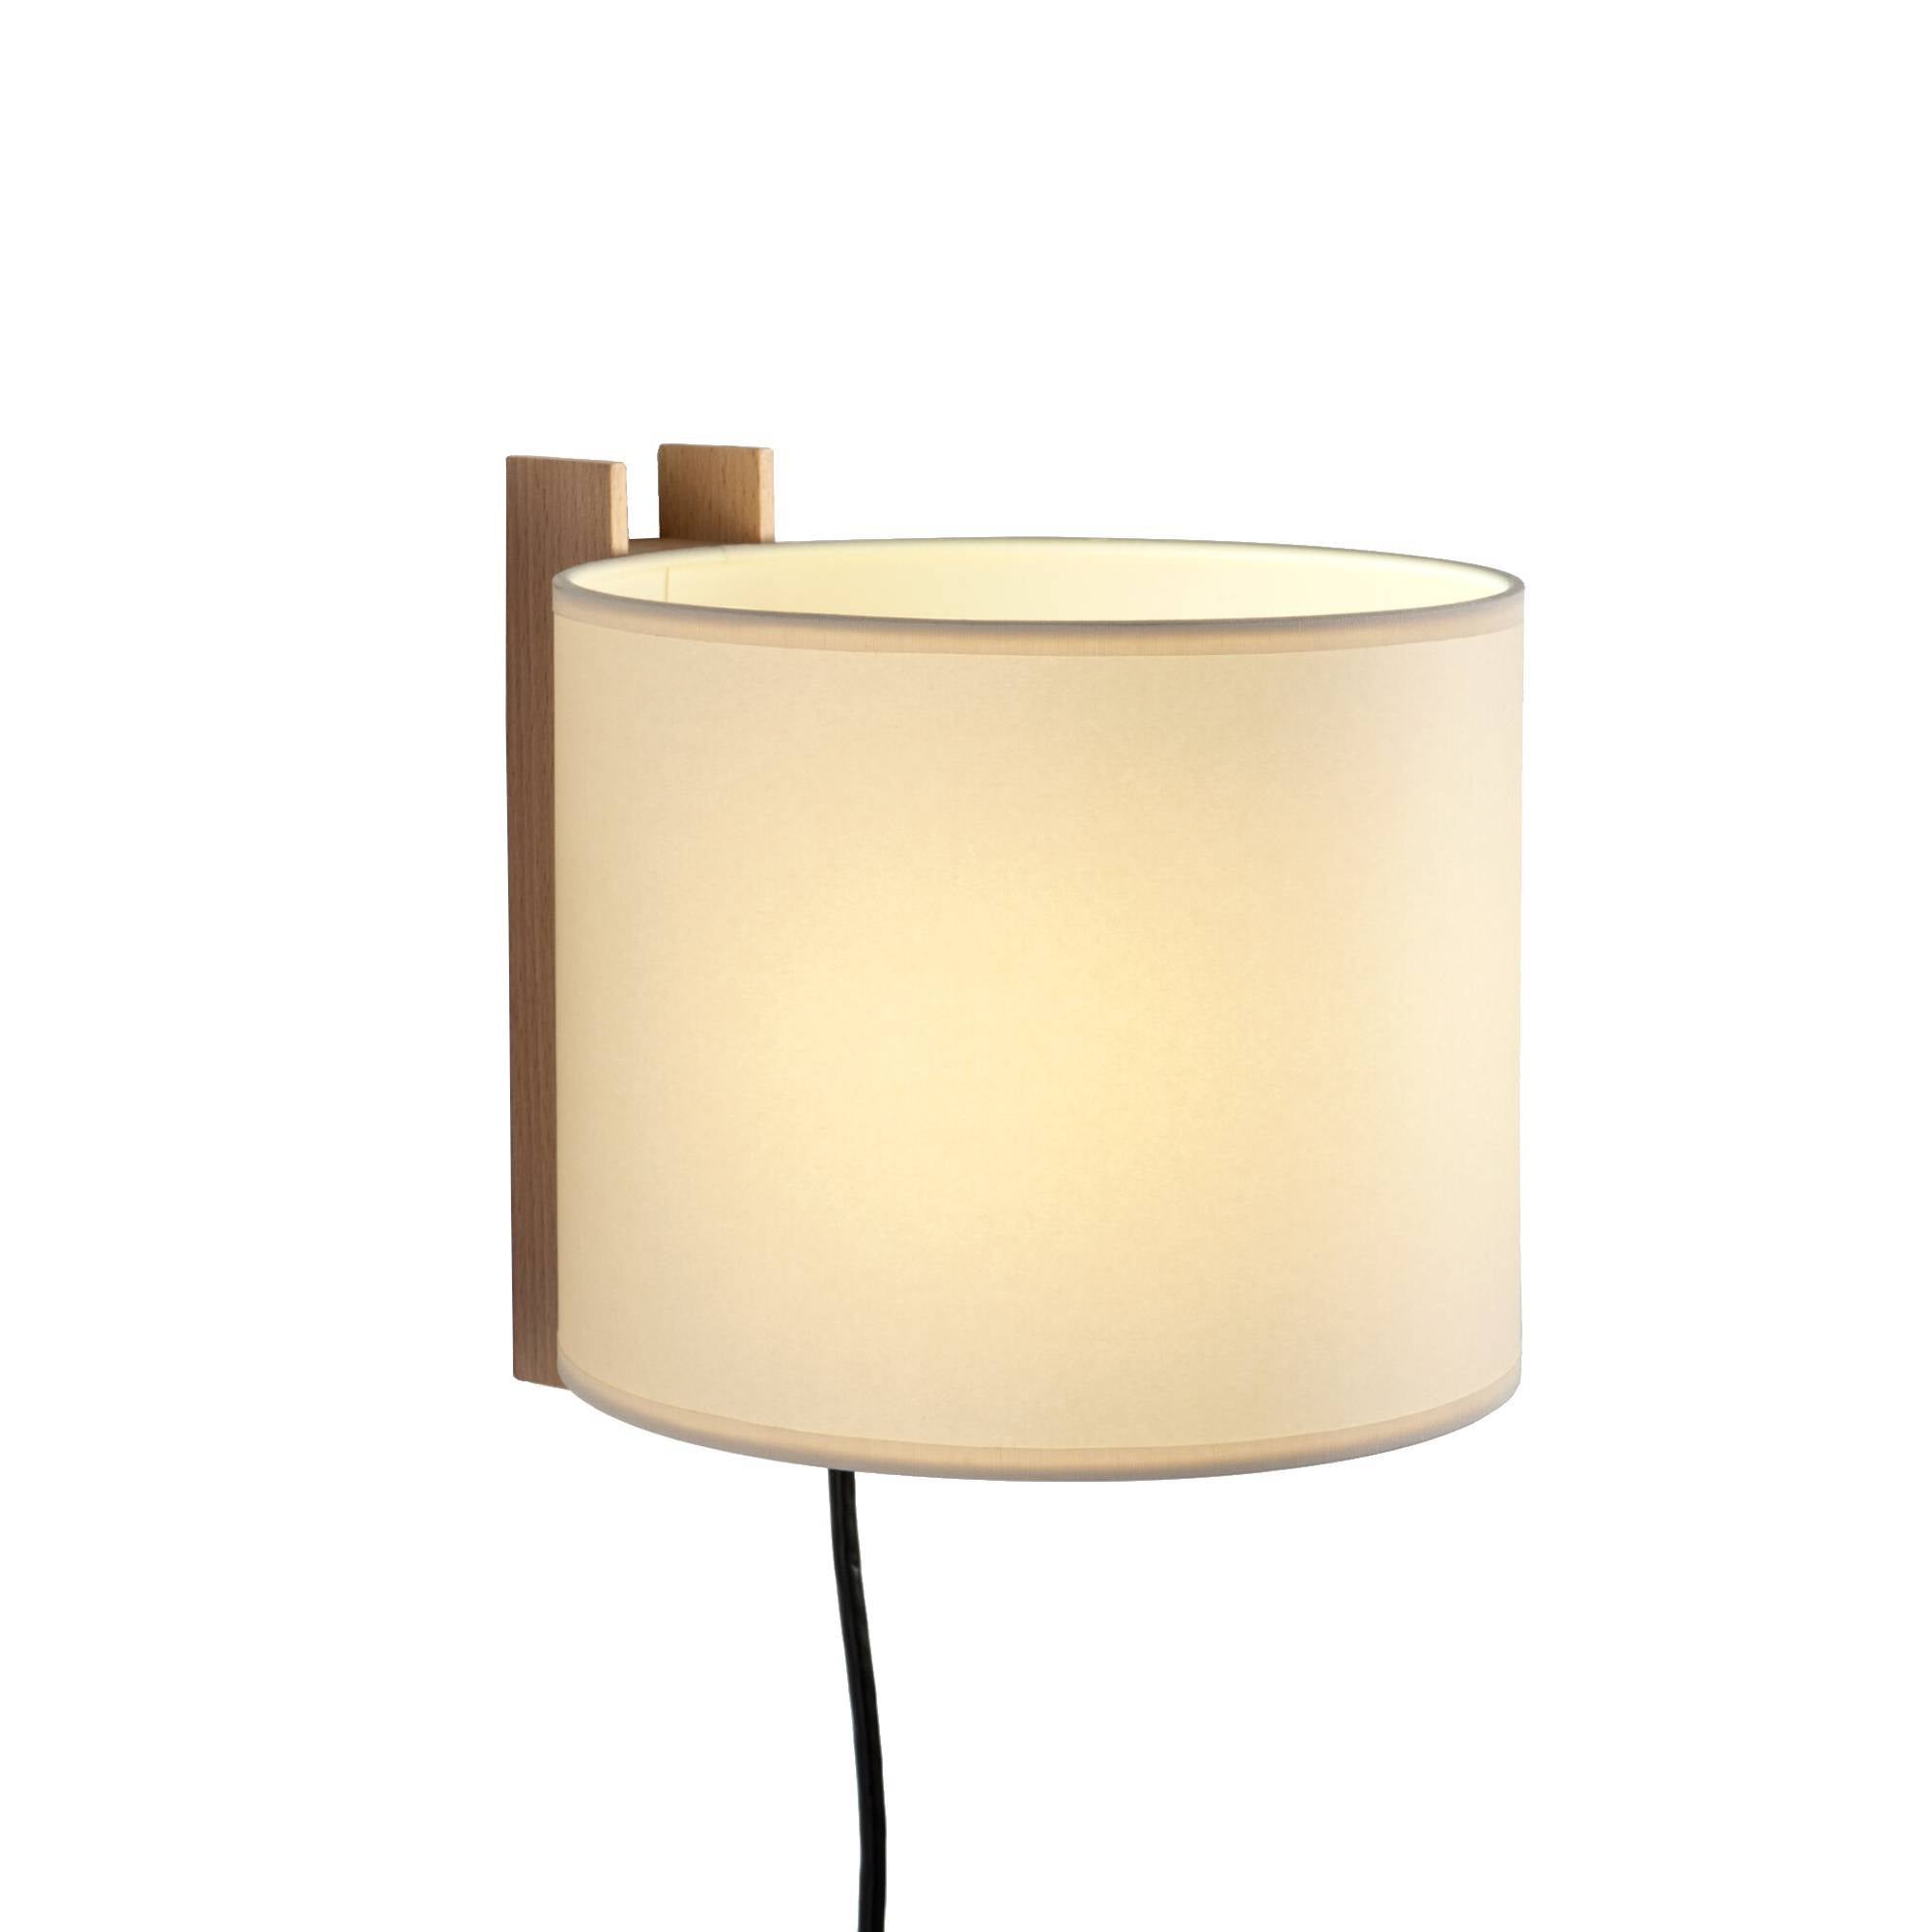 TMM Wall Lamp: Short + Beige + Beech + With Plug